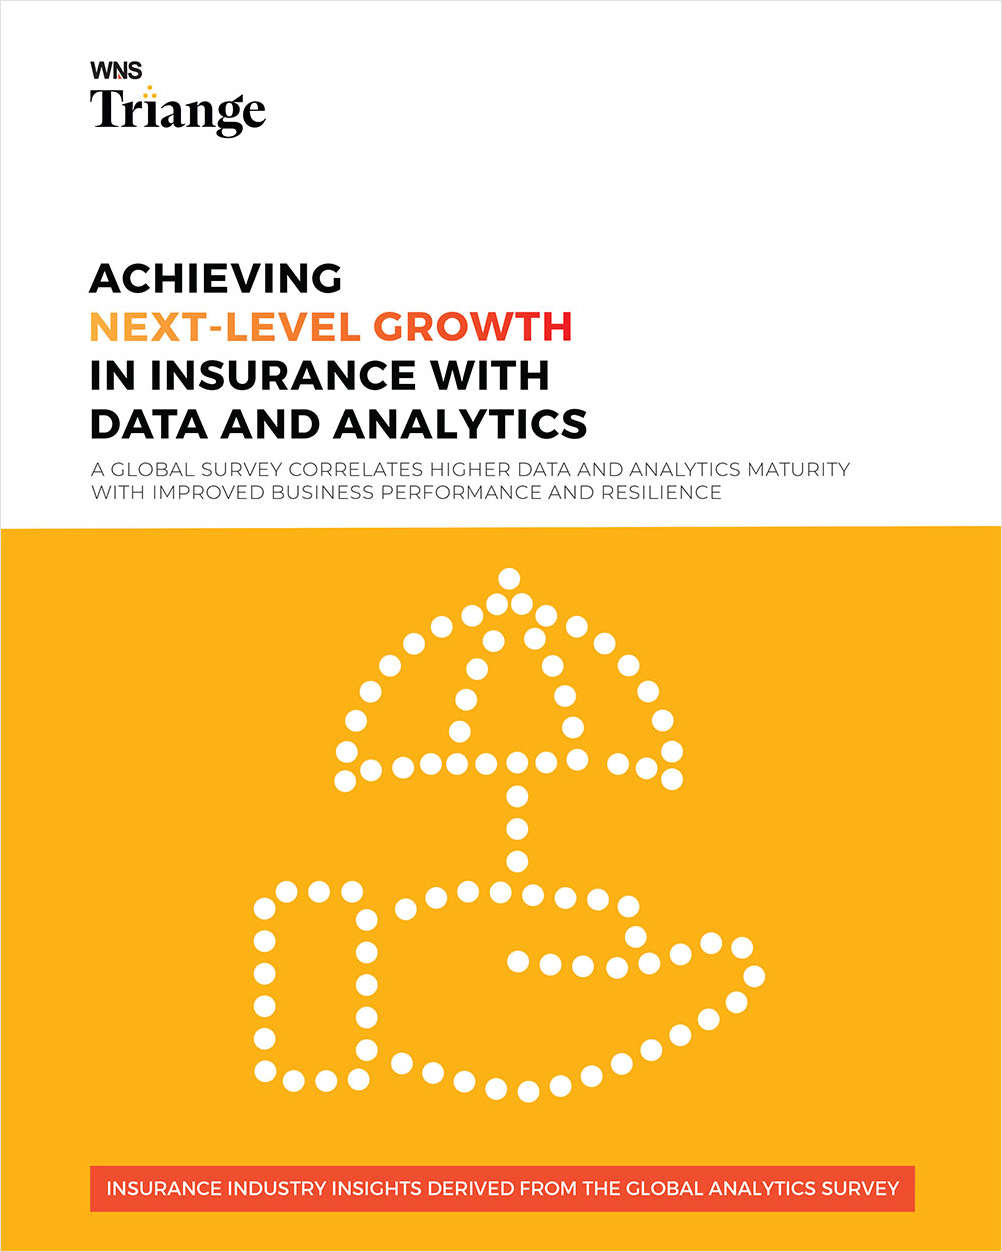 Achieving Next-Level Growth in Insurance with Data & Analytics